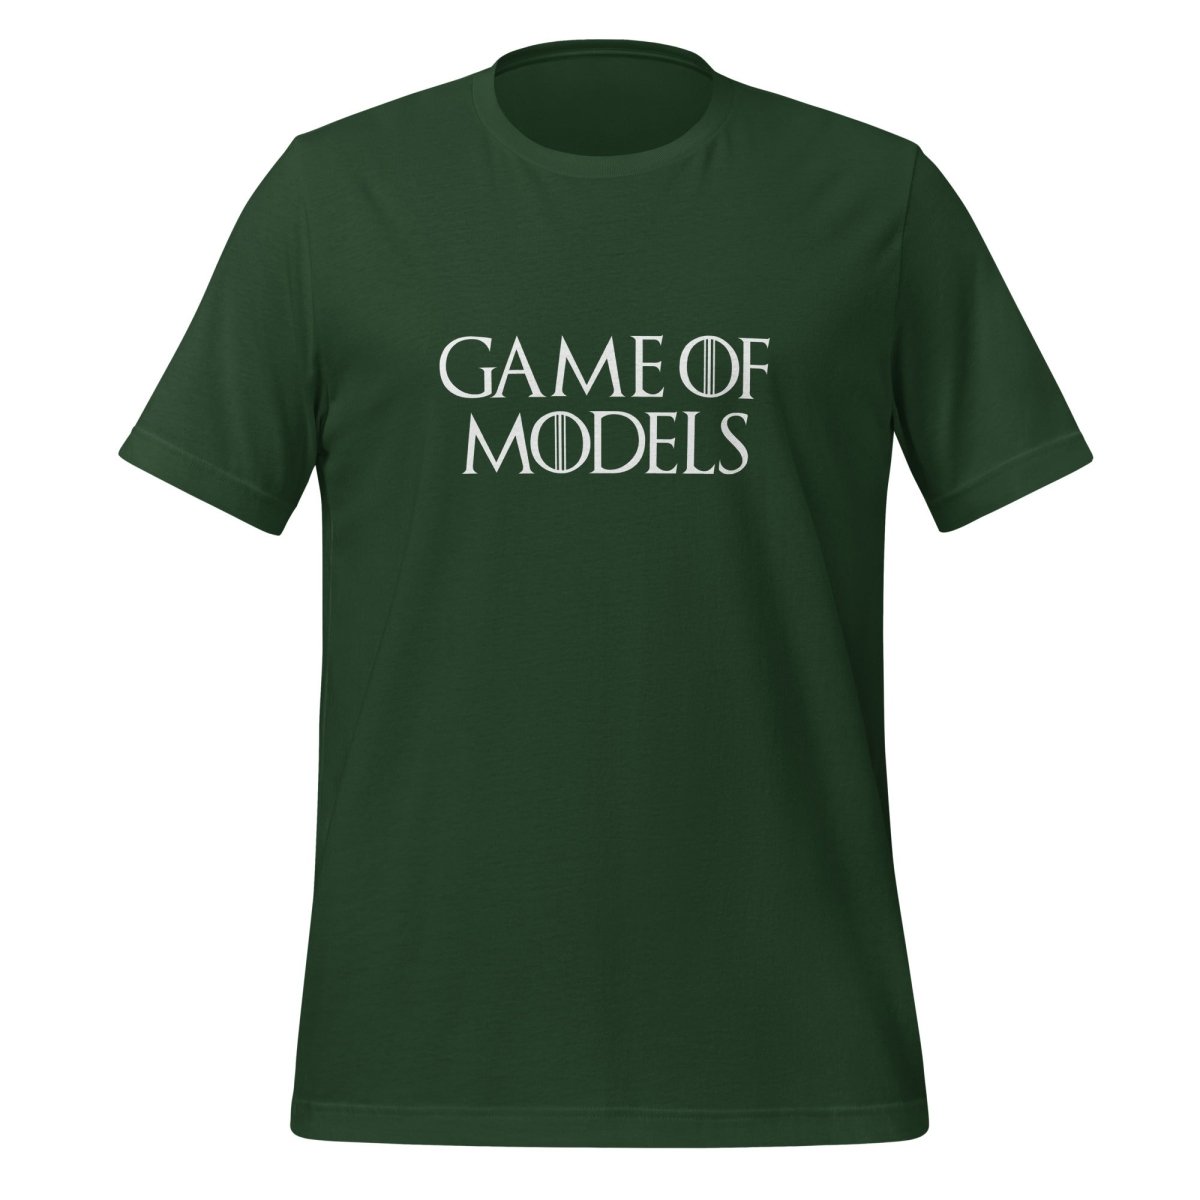 Game of Models T - Shirt (unisex) - Forest - AI Store